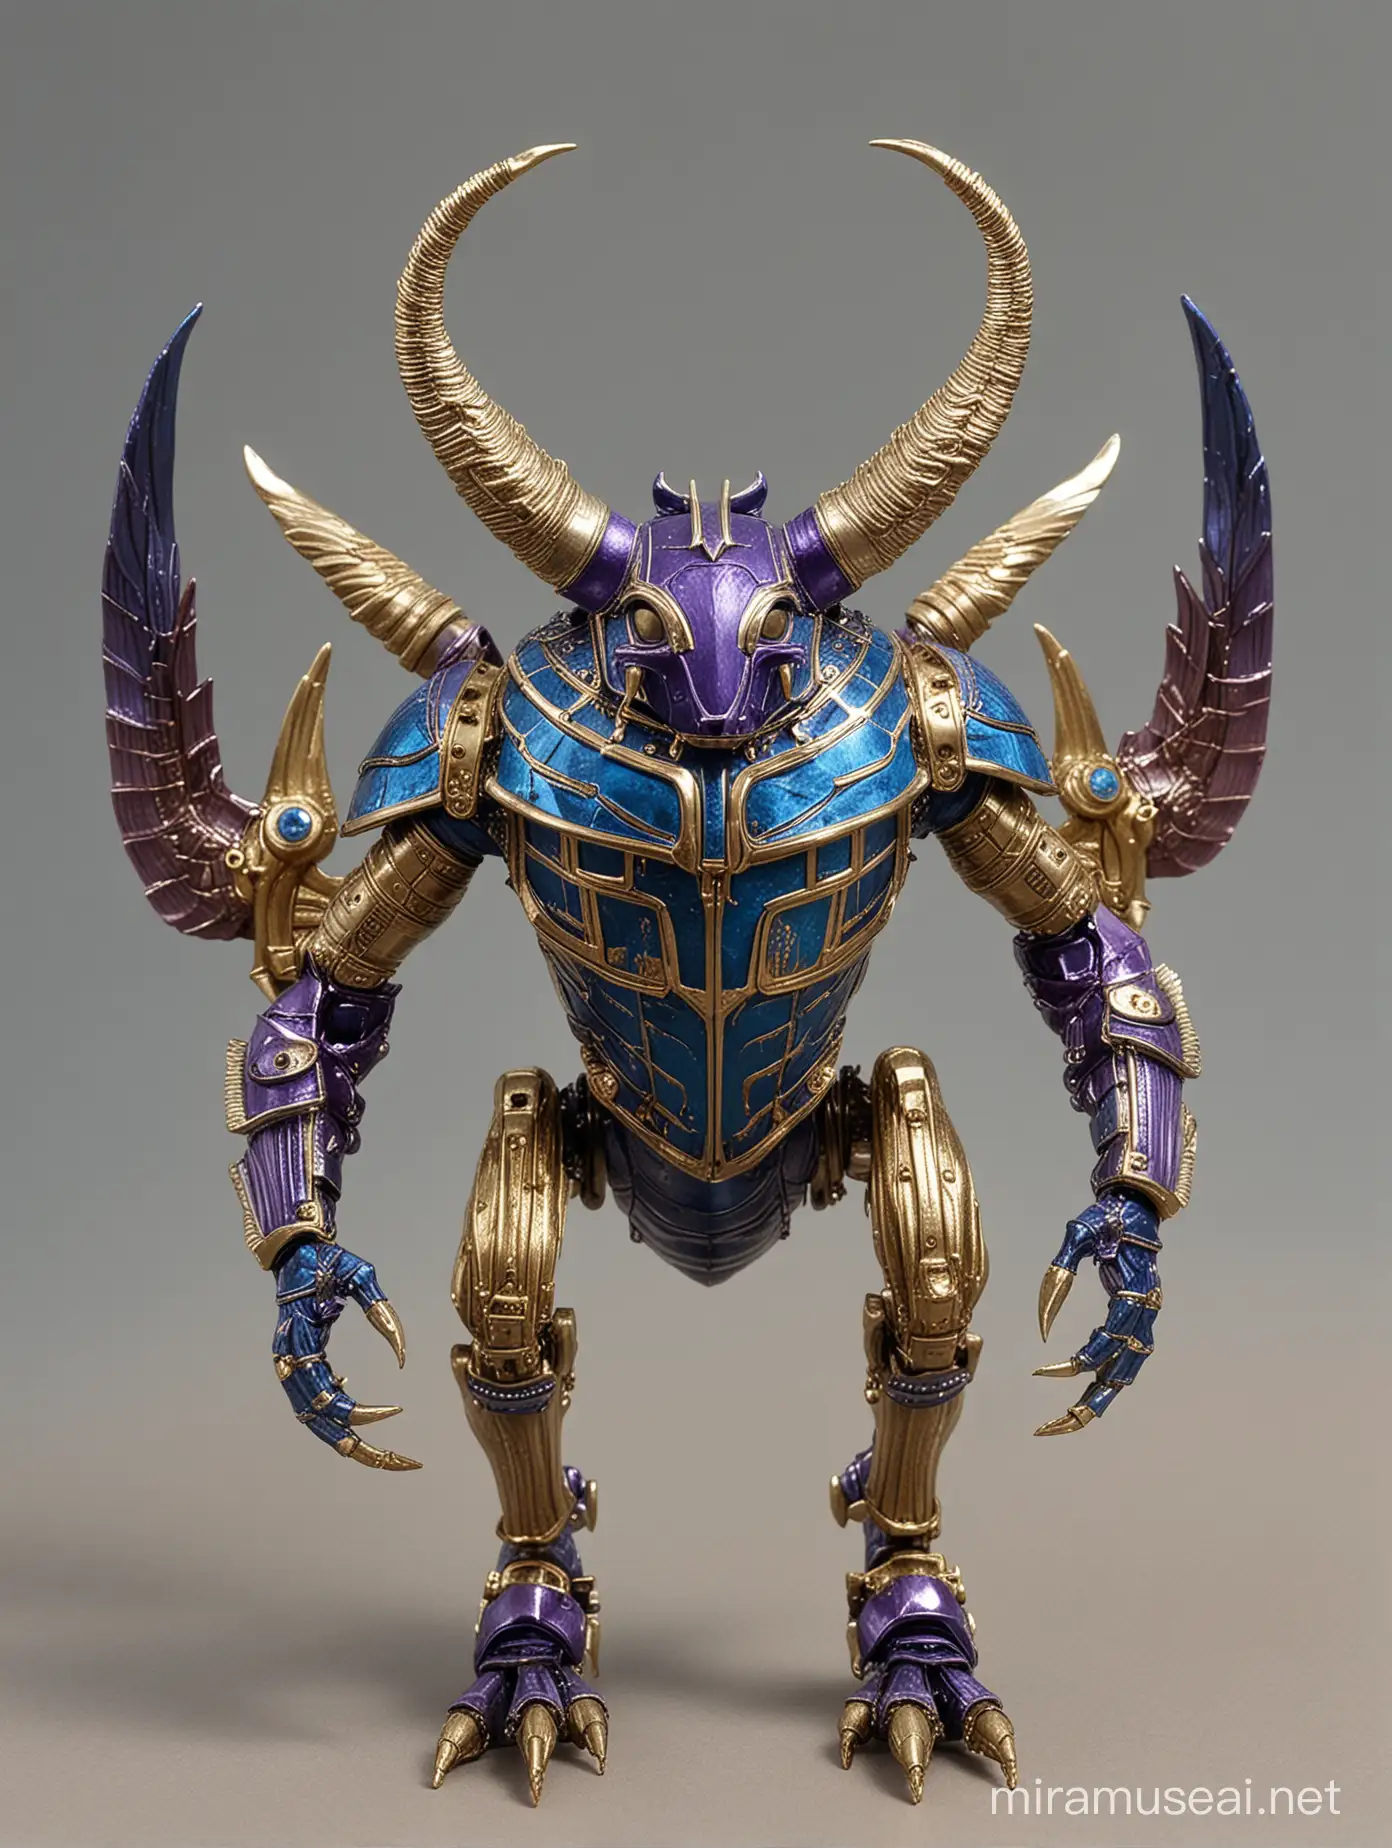 Regal Scarab Beetle Army Marching with SilverLegged Armor in Gold Blue and Purple Splendor